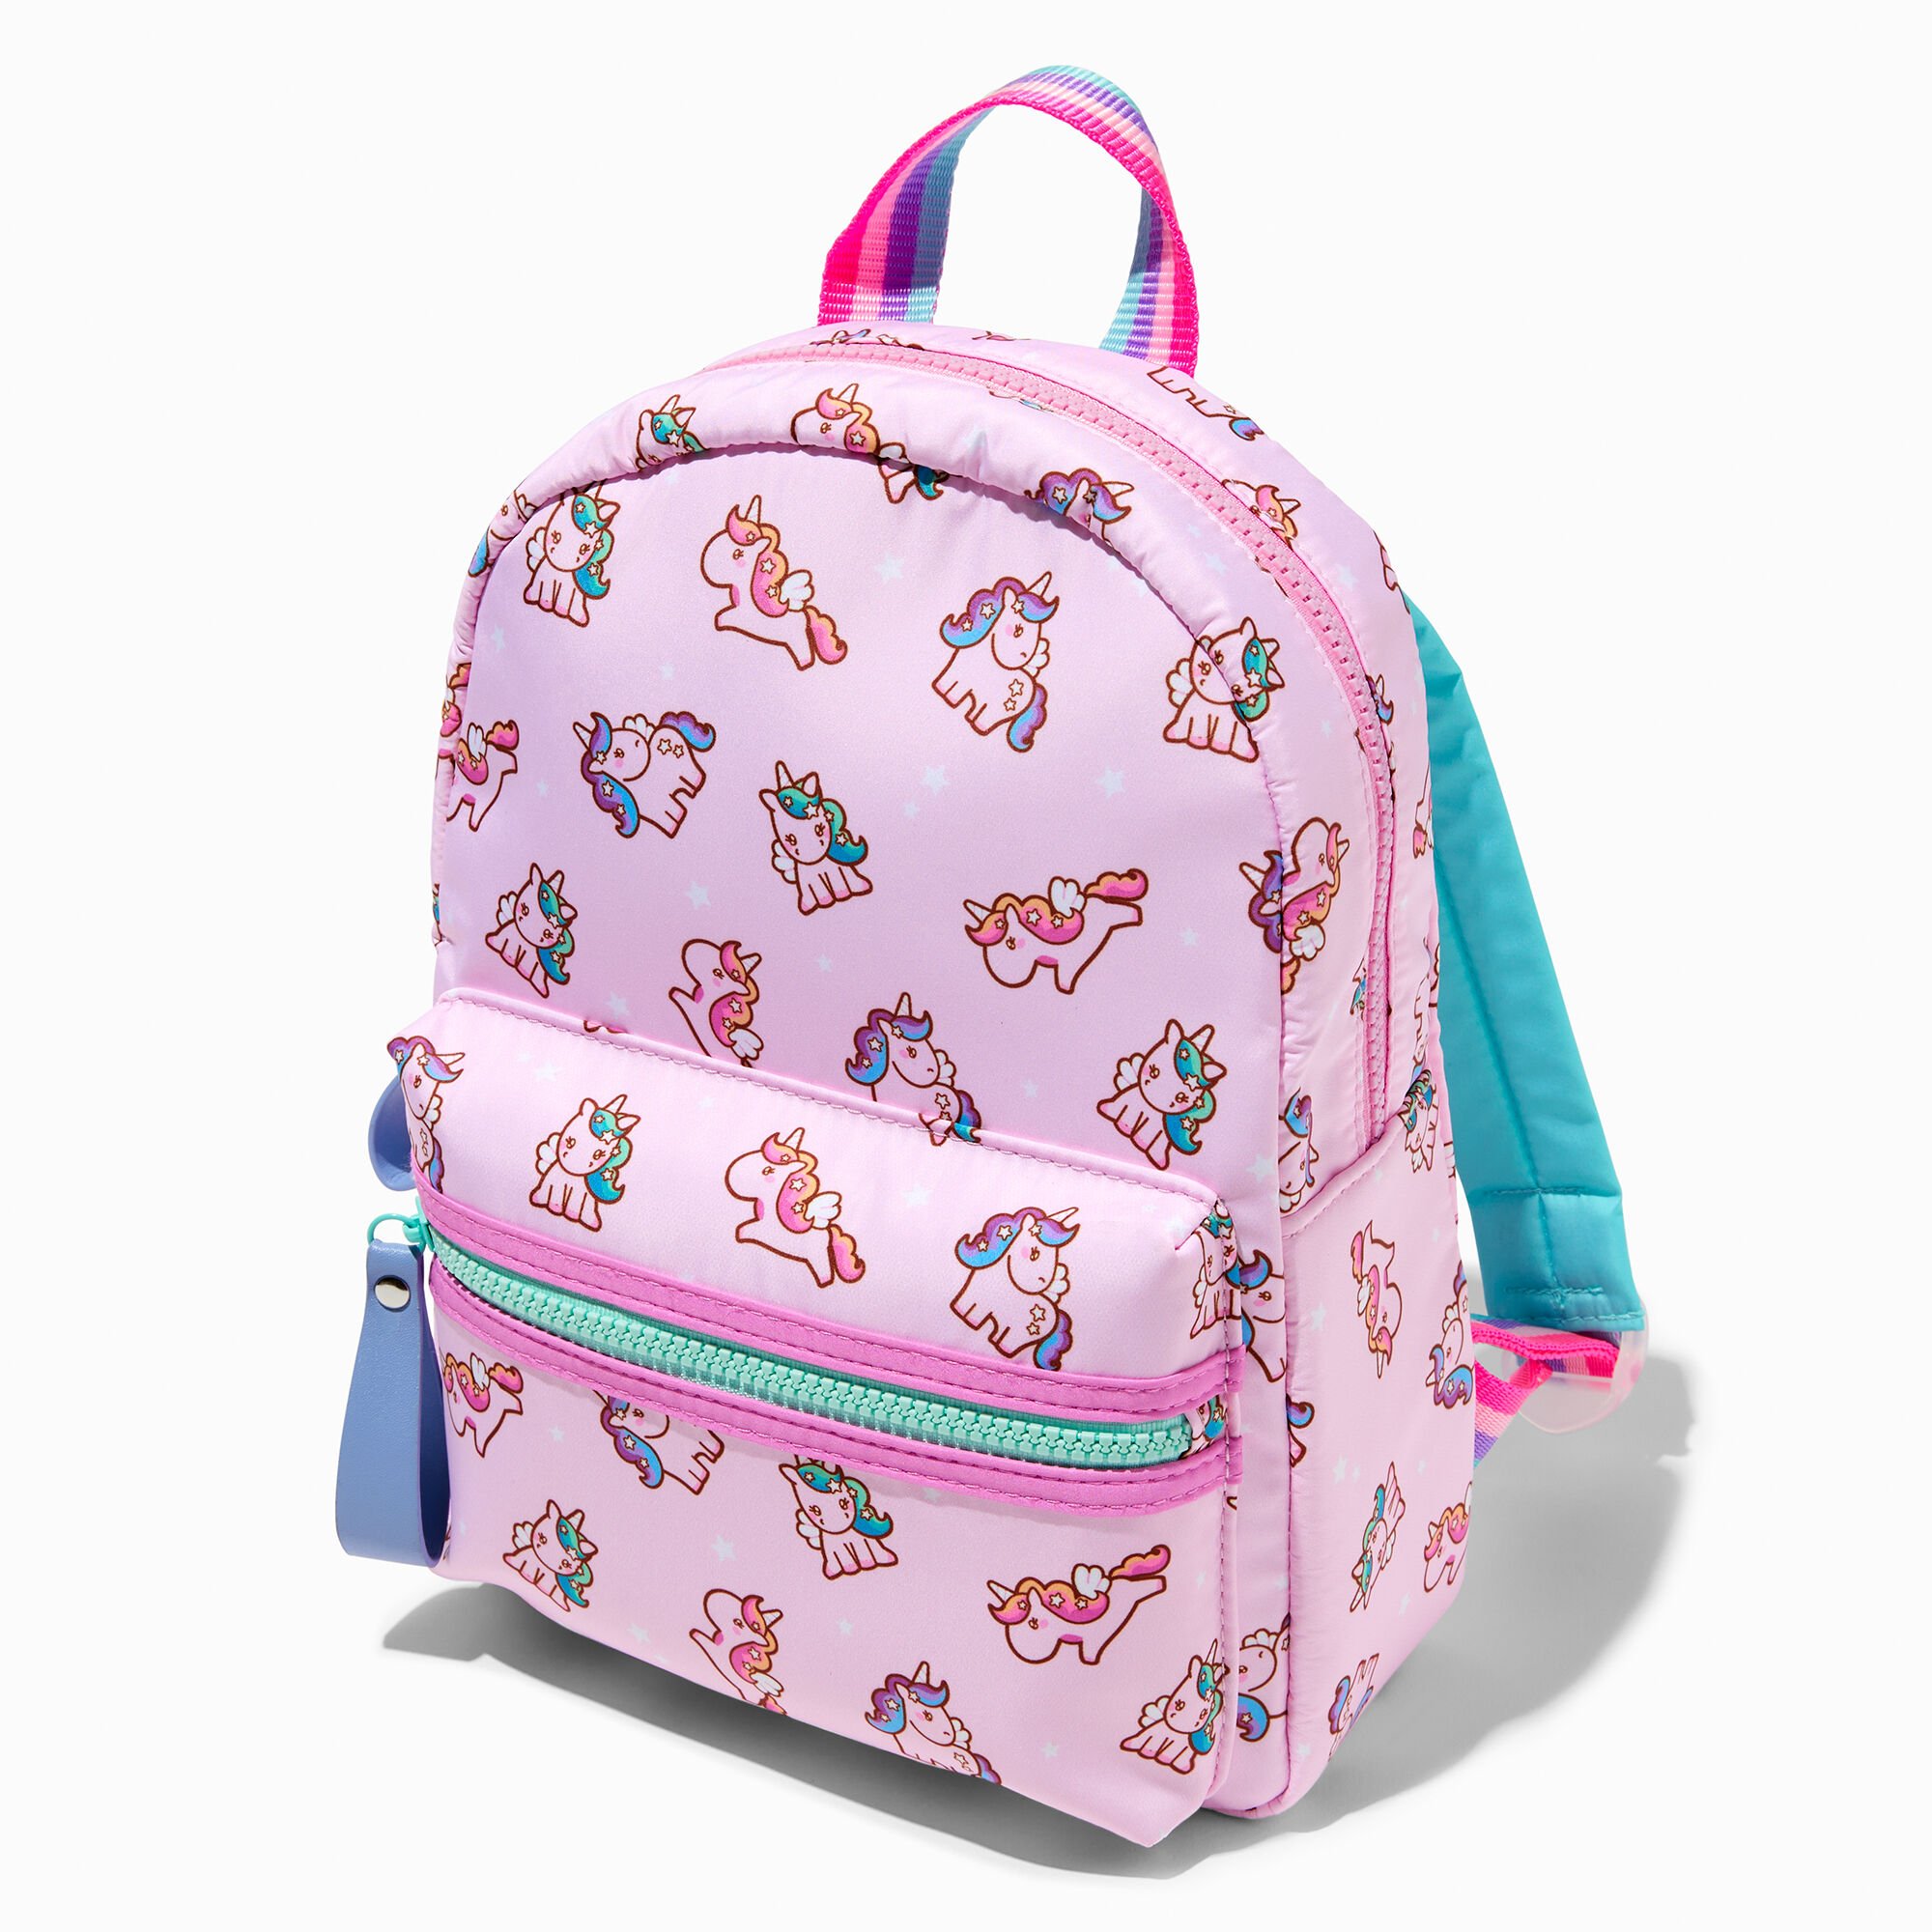 View Claires Club Pastel Unicorn Backpack Rainbow information